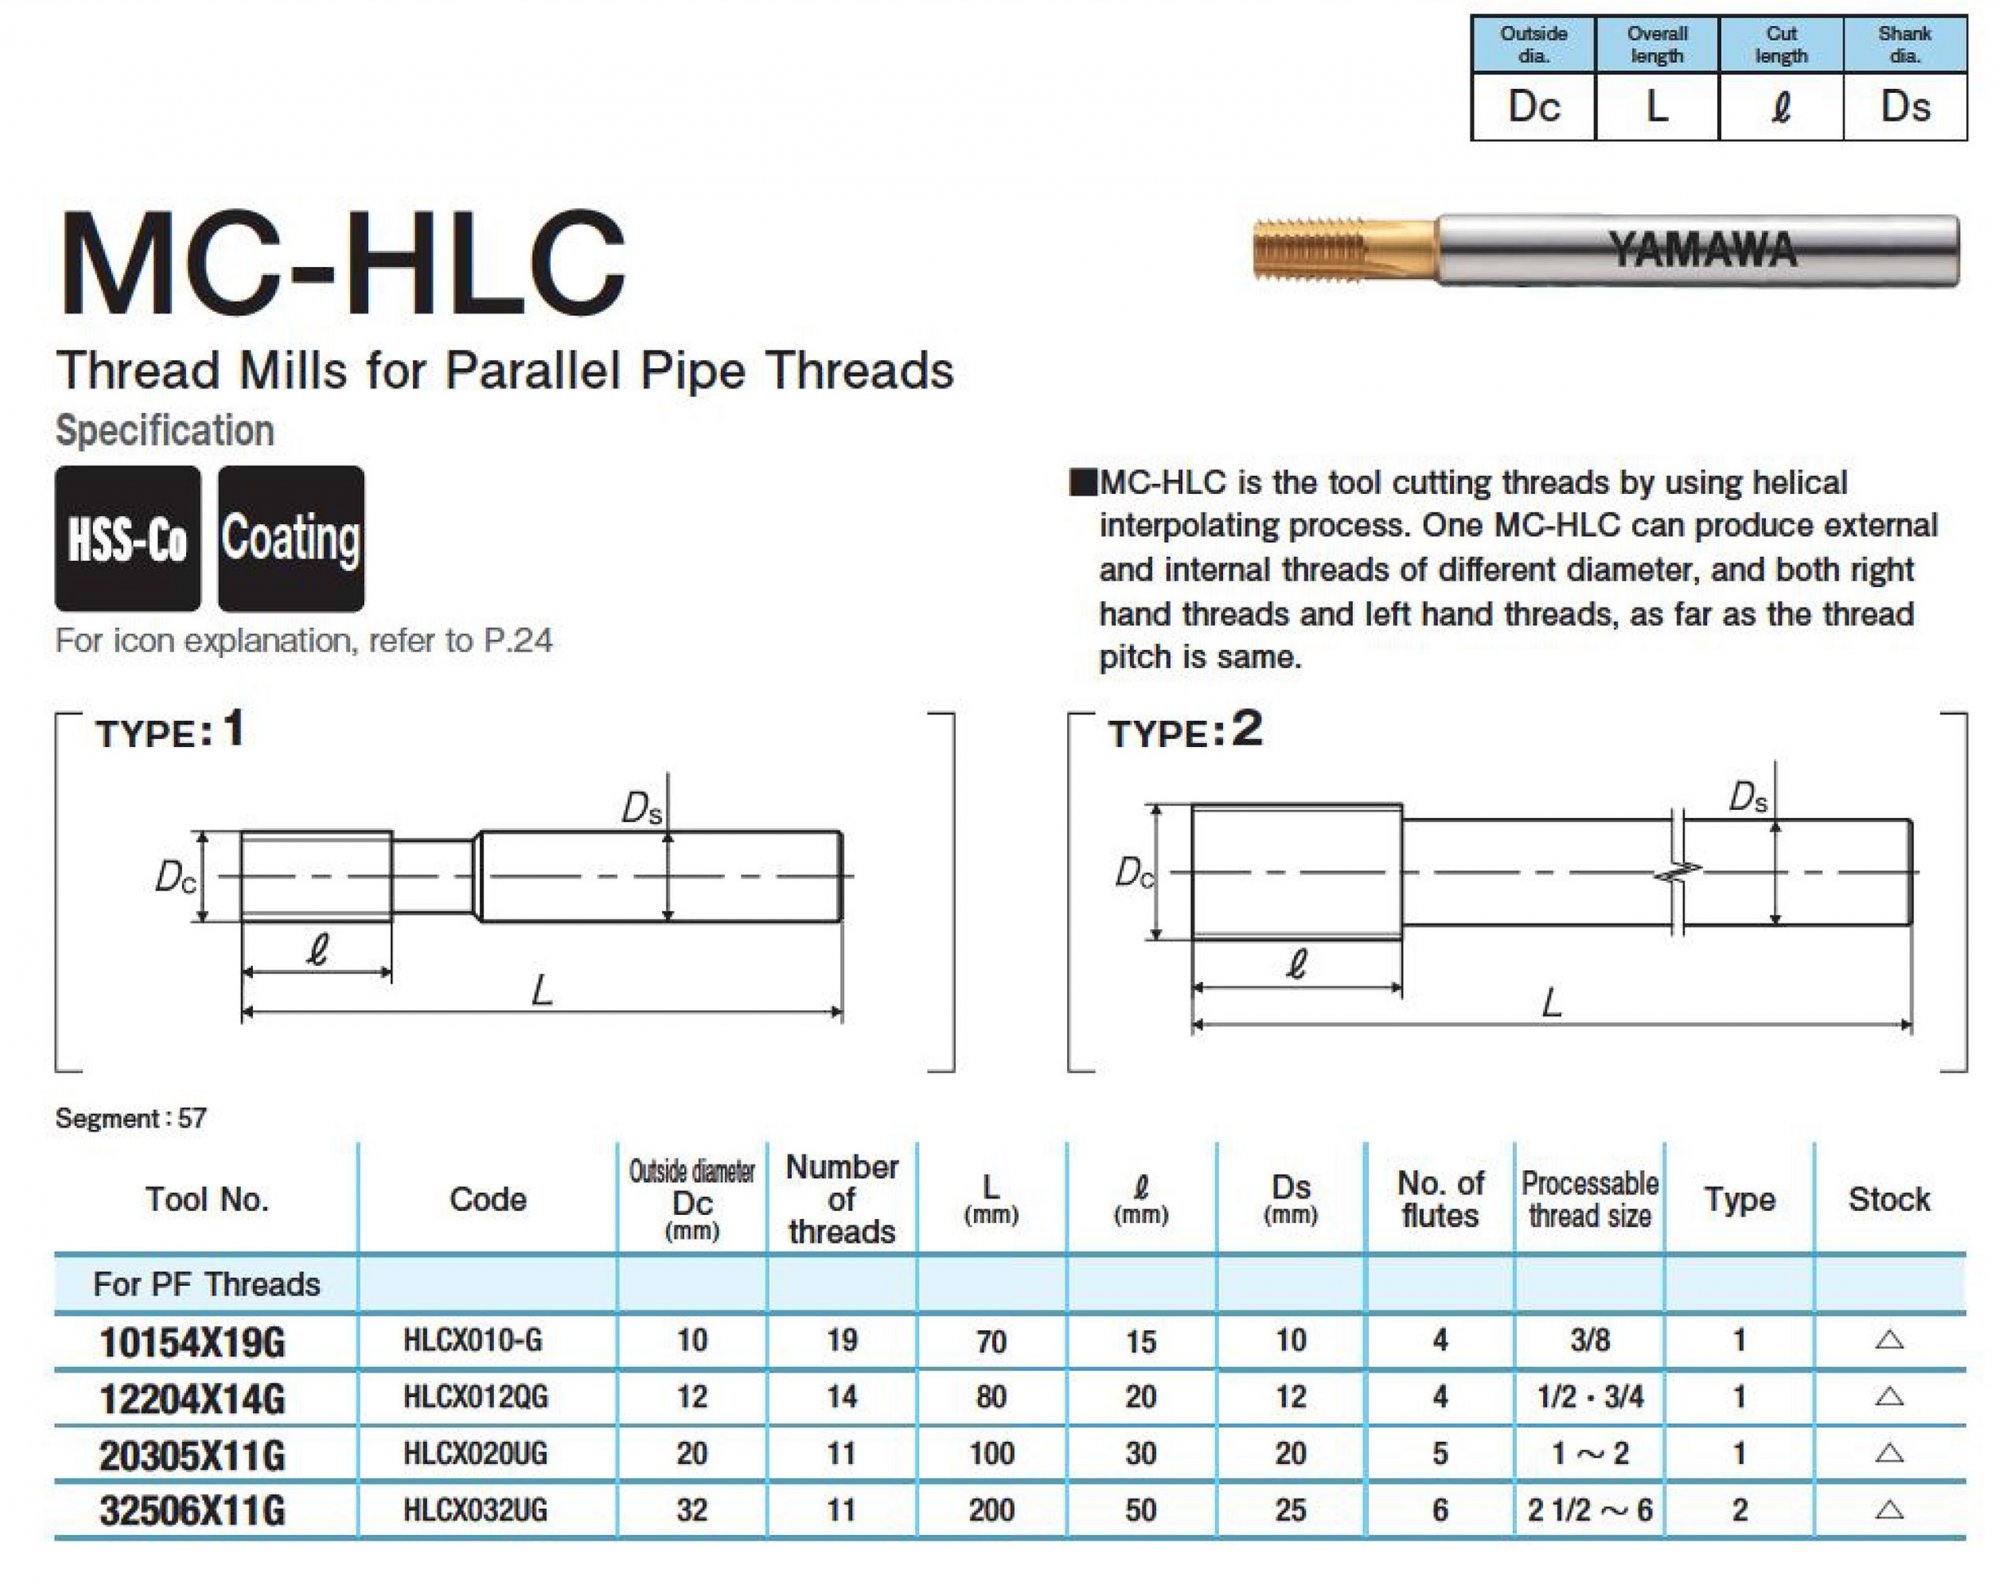 Thread-Mills-for-Parallel-Pipe-Threads-MC-HLC-02